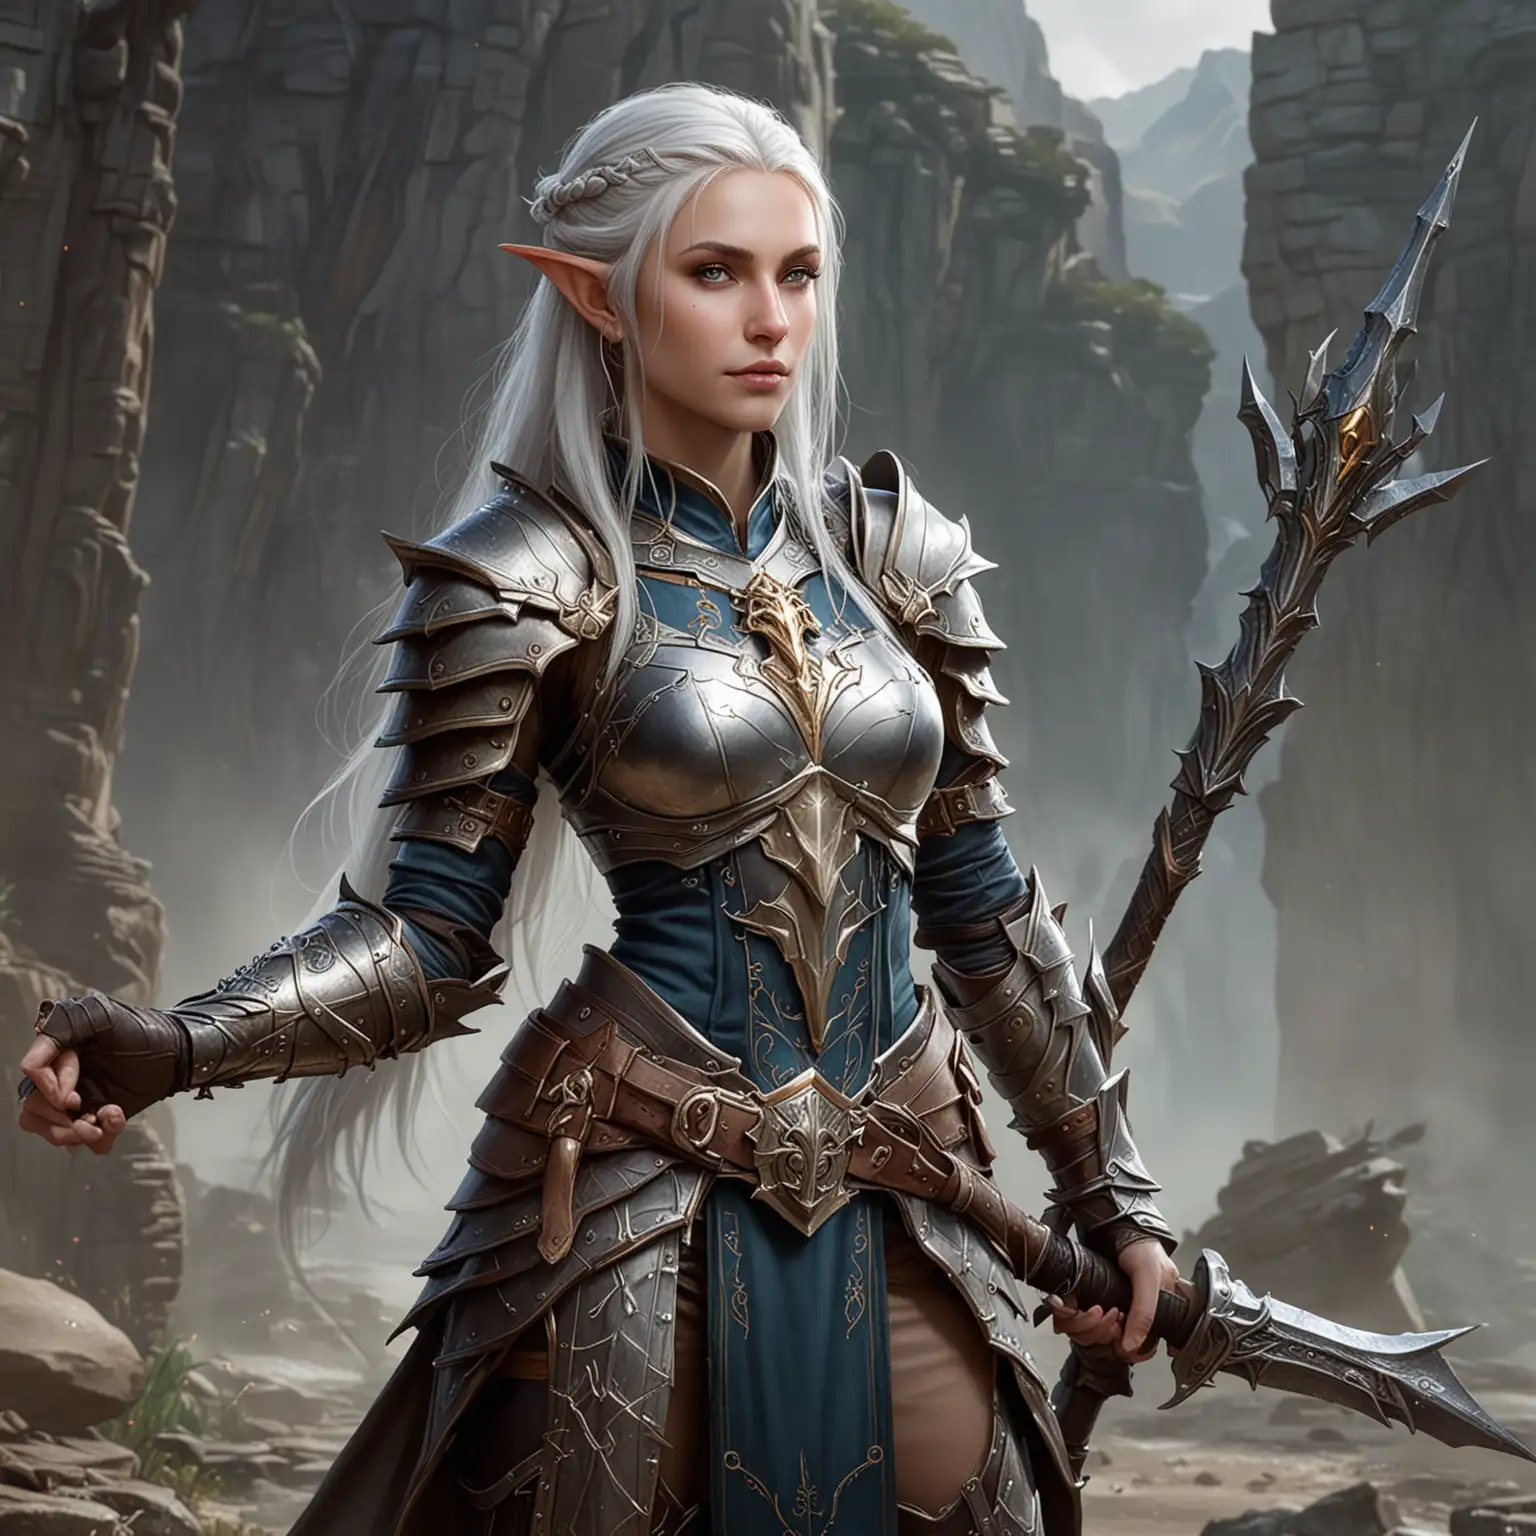 Sister Gariel the high elf from Lost Mines of Phandalin wearing armor with a dragon emblem on it.